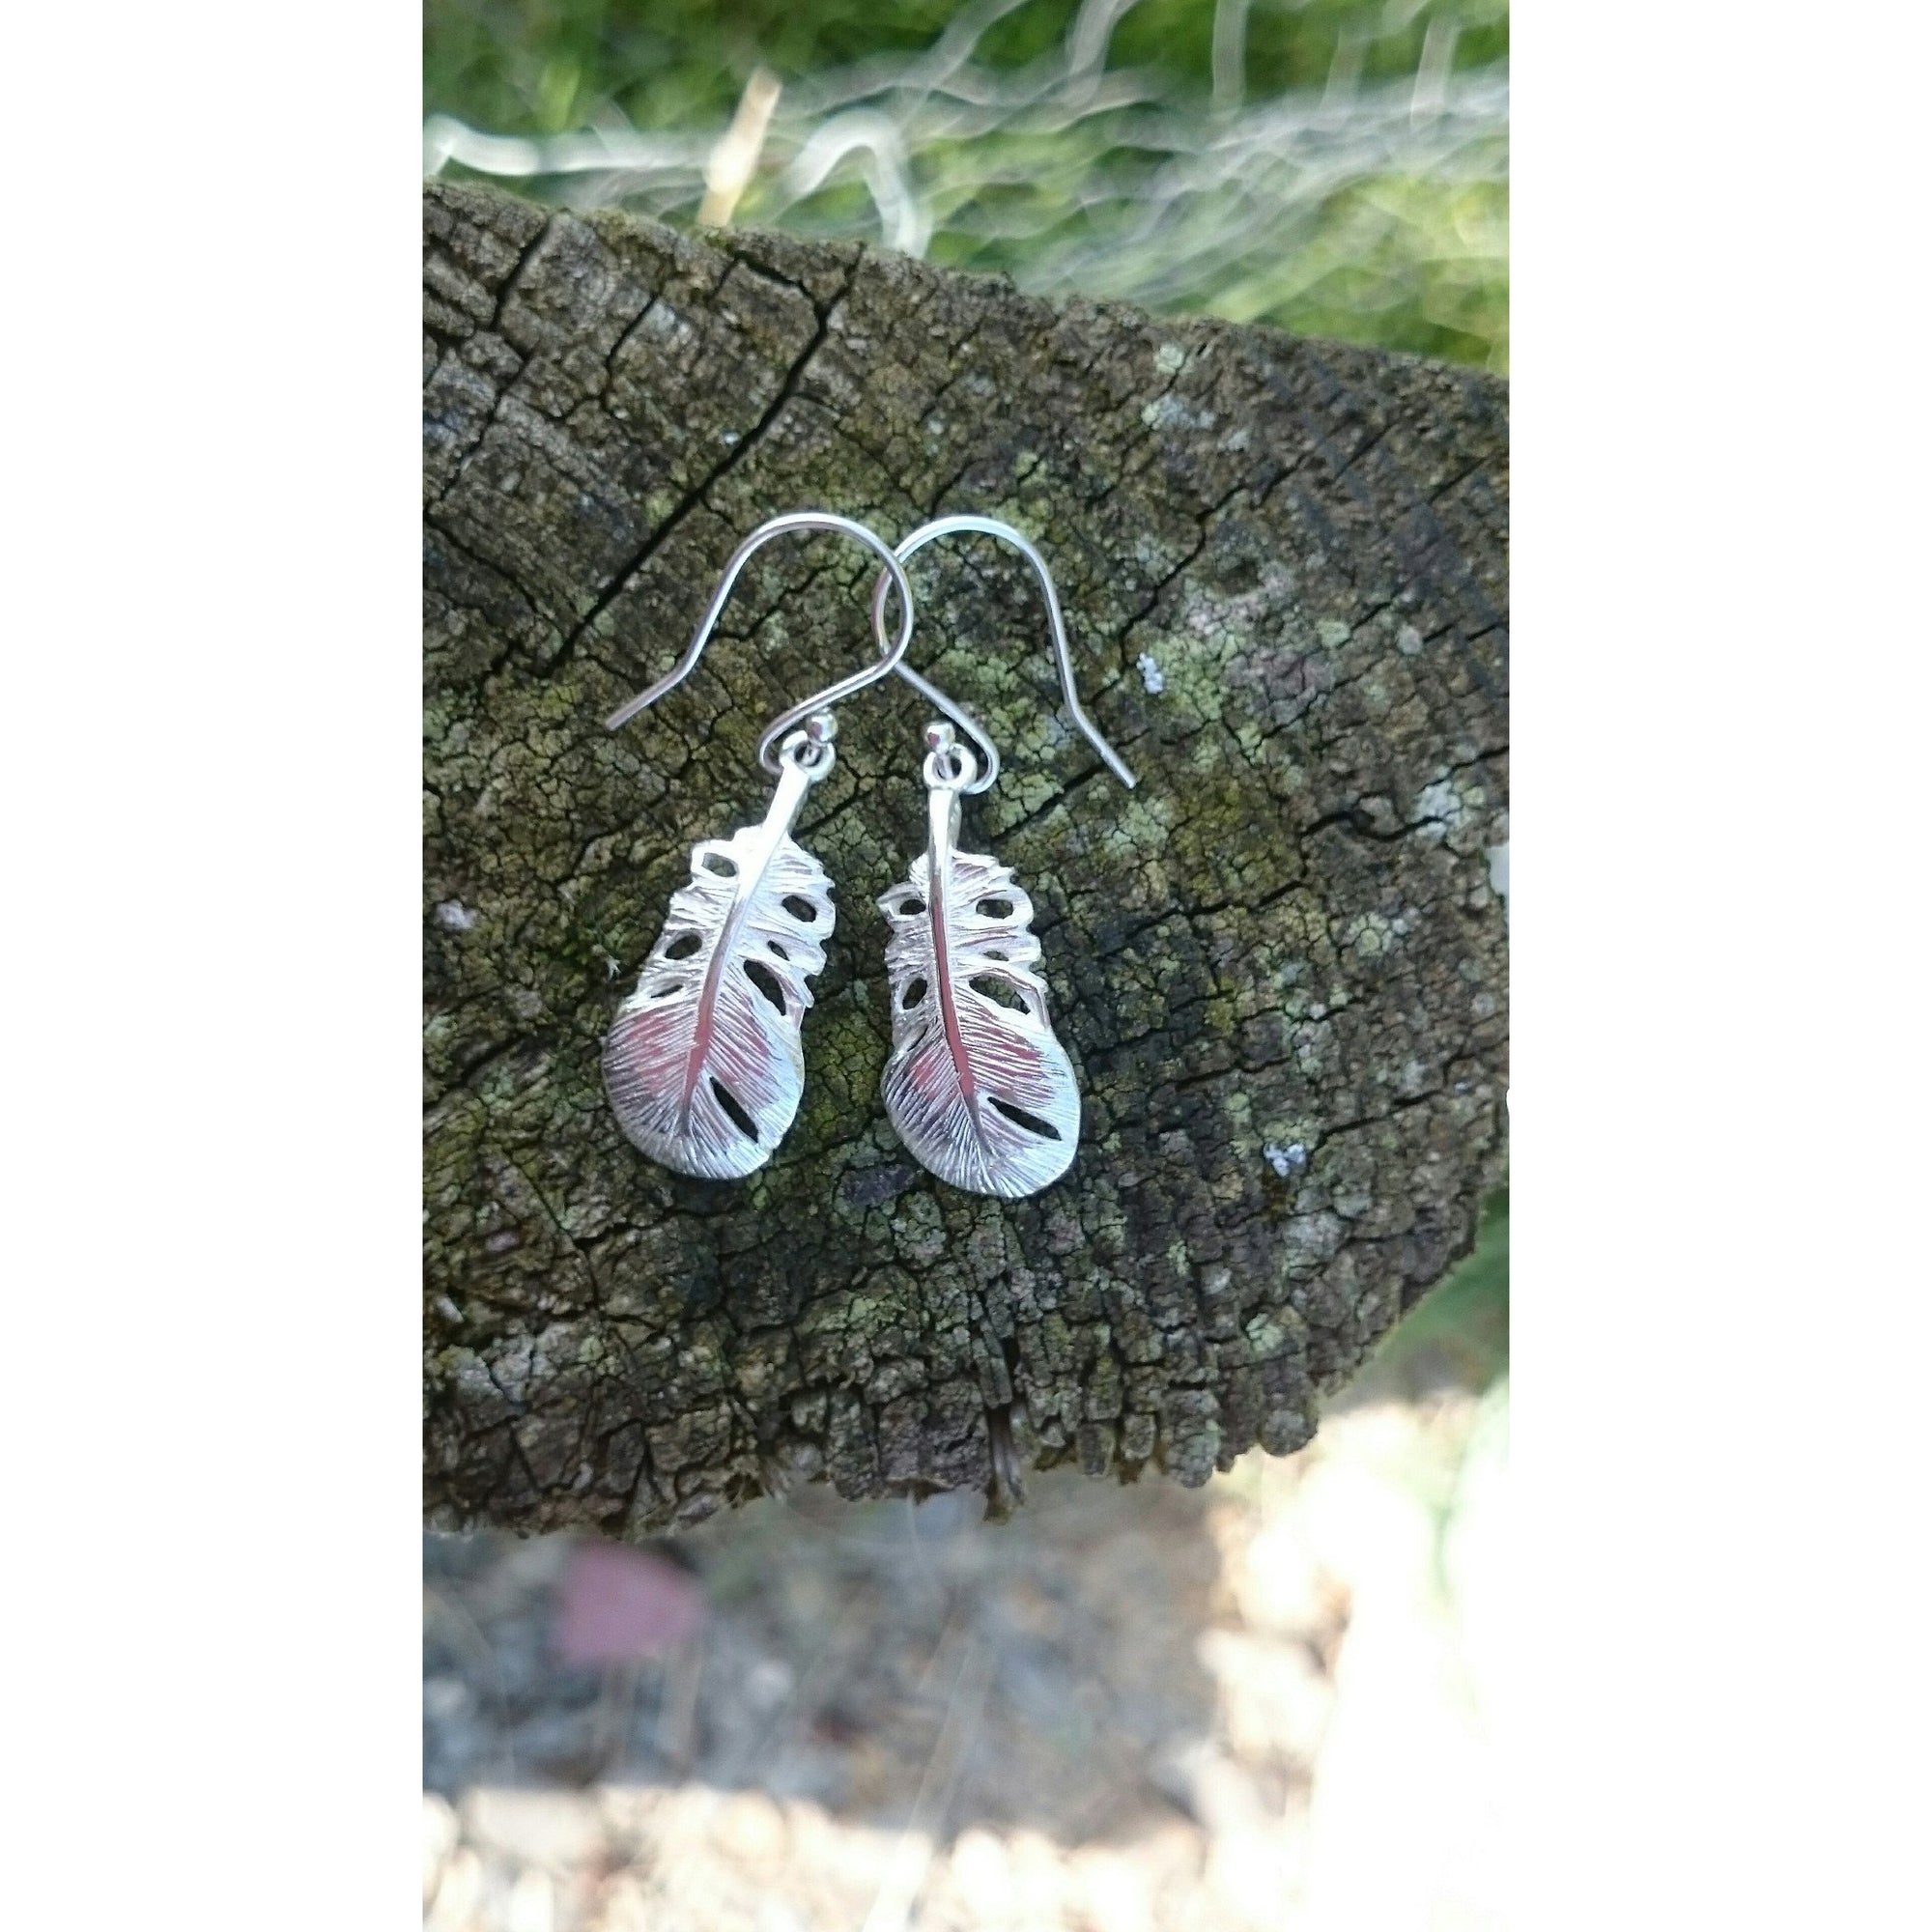 These Irish Baby Angel Feather Drop Earrings are laid against tree bark. They are part of Elena Brennan's My Angel jewellery collection.